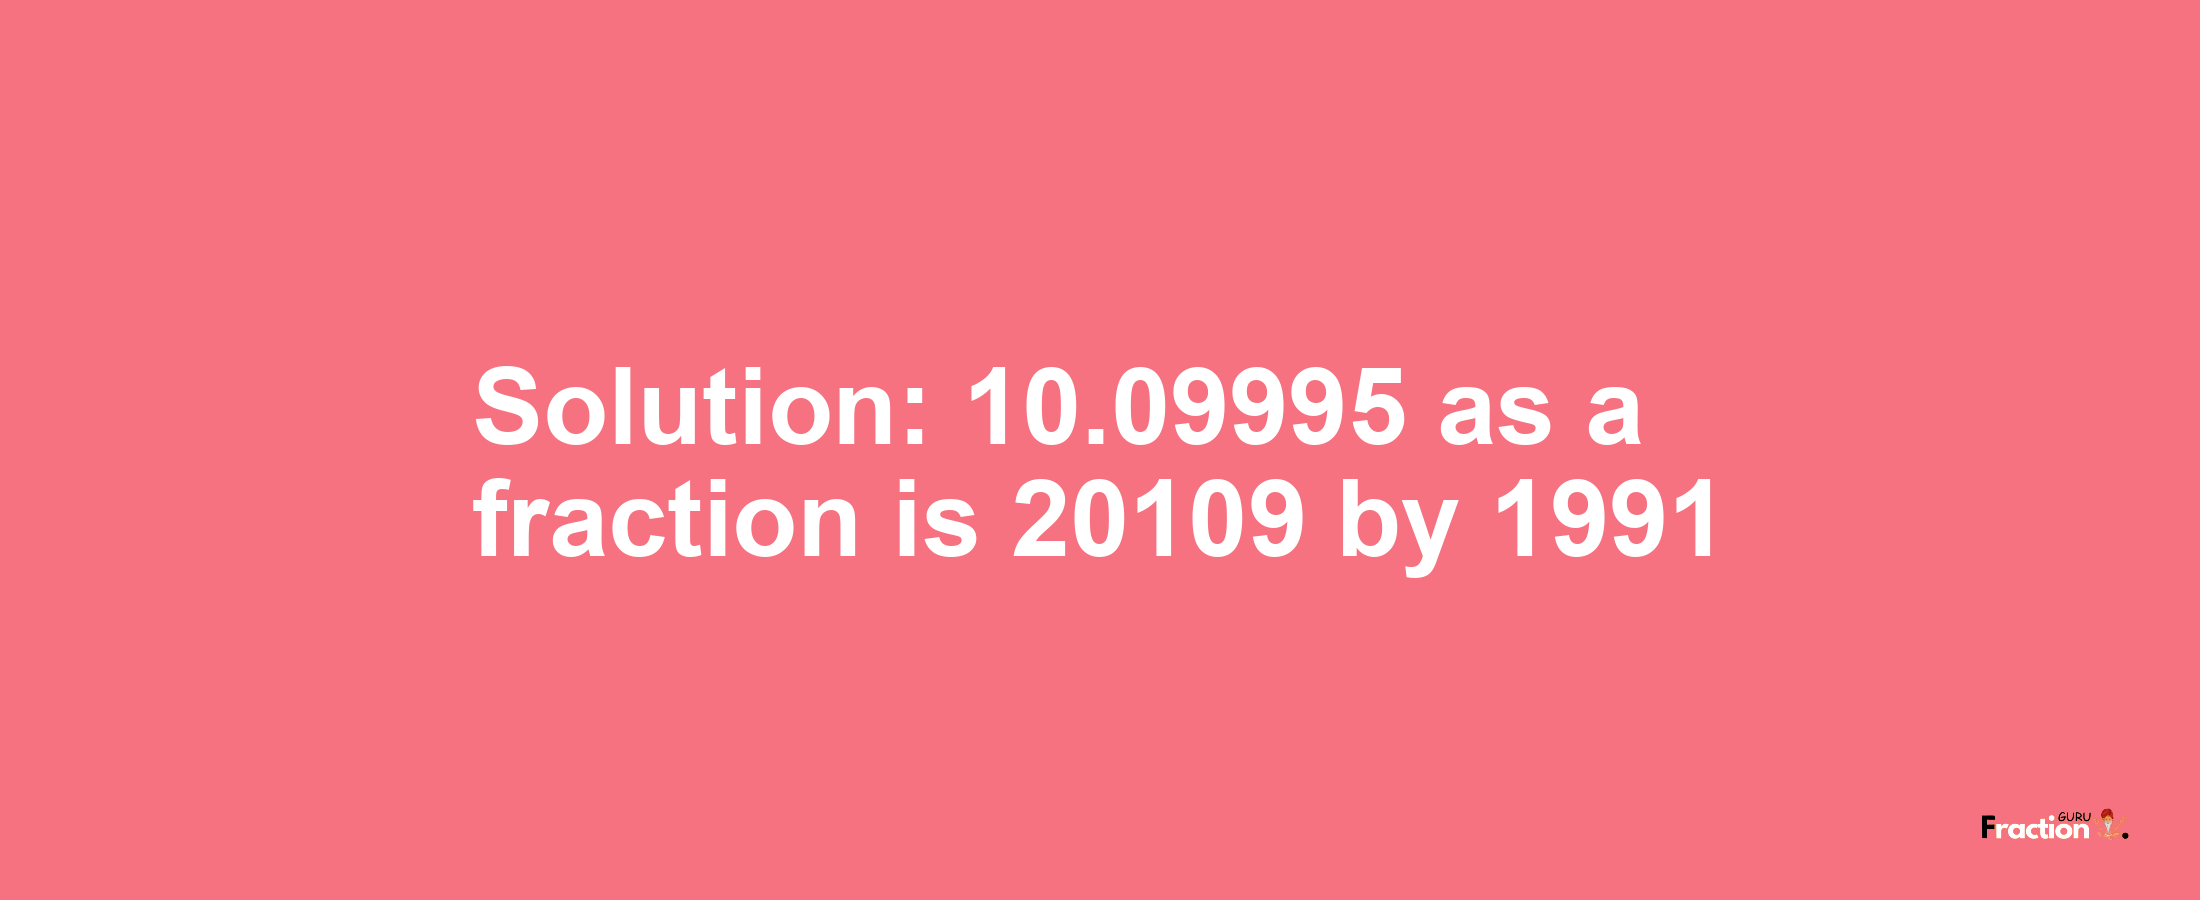 Solution:10.09995 as a fraction is 20109/1991